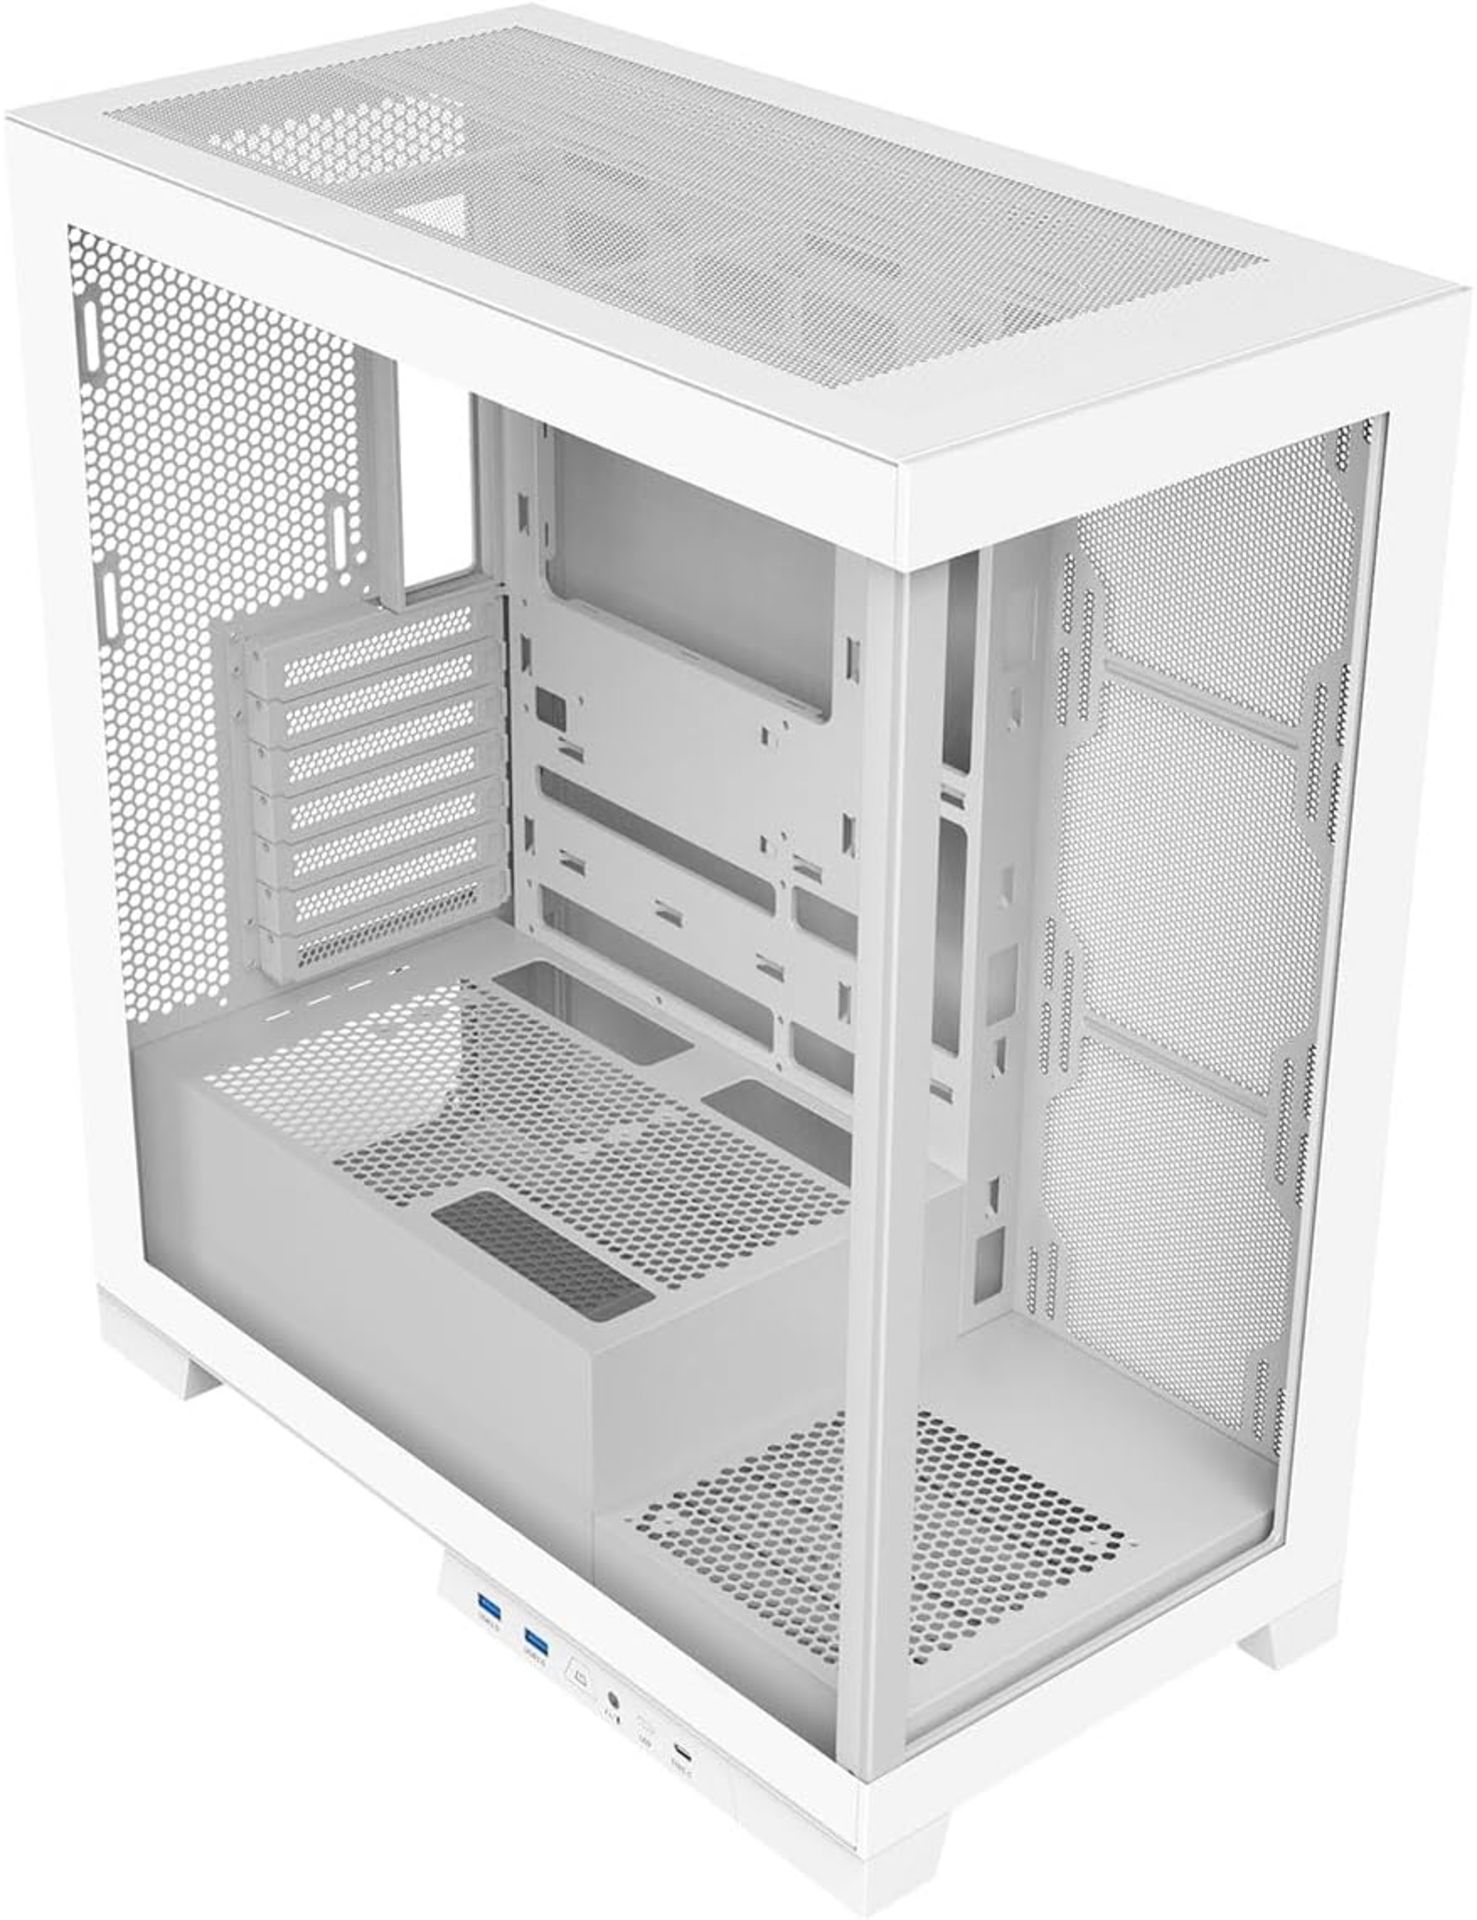 NEW & BOXED CIT Diamond XR Mid Tower PC Case With 7 Fans - WHITE. RRP £99.99. If you want a sharp- - Image 3 of 9